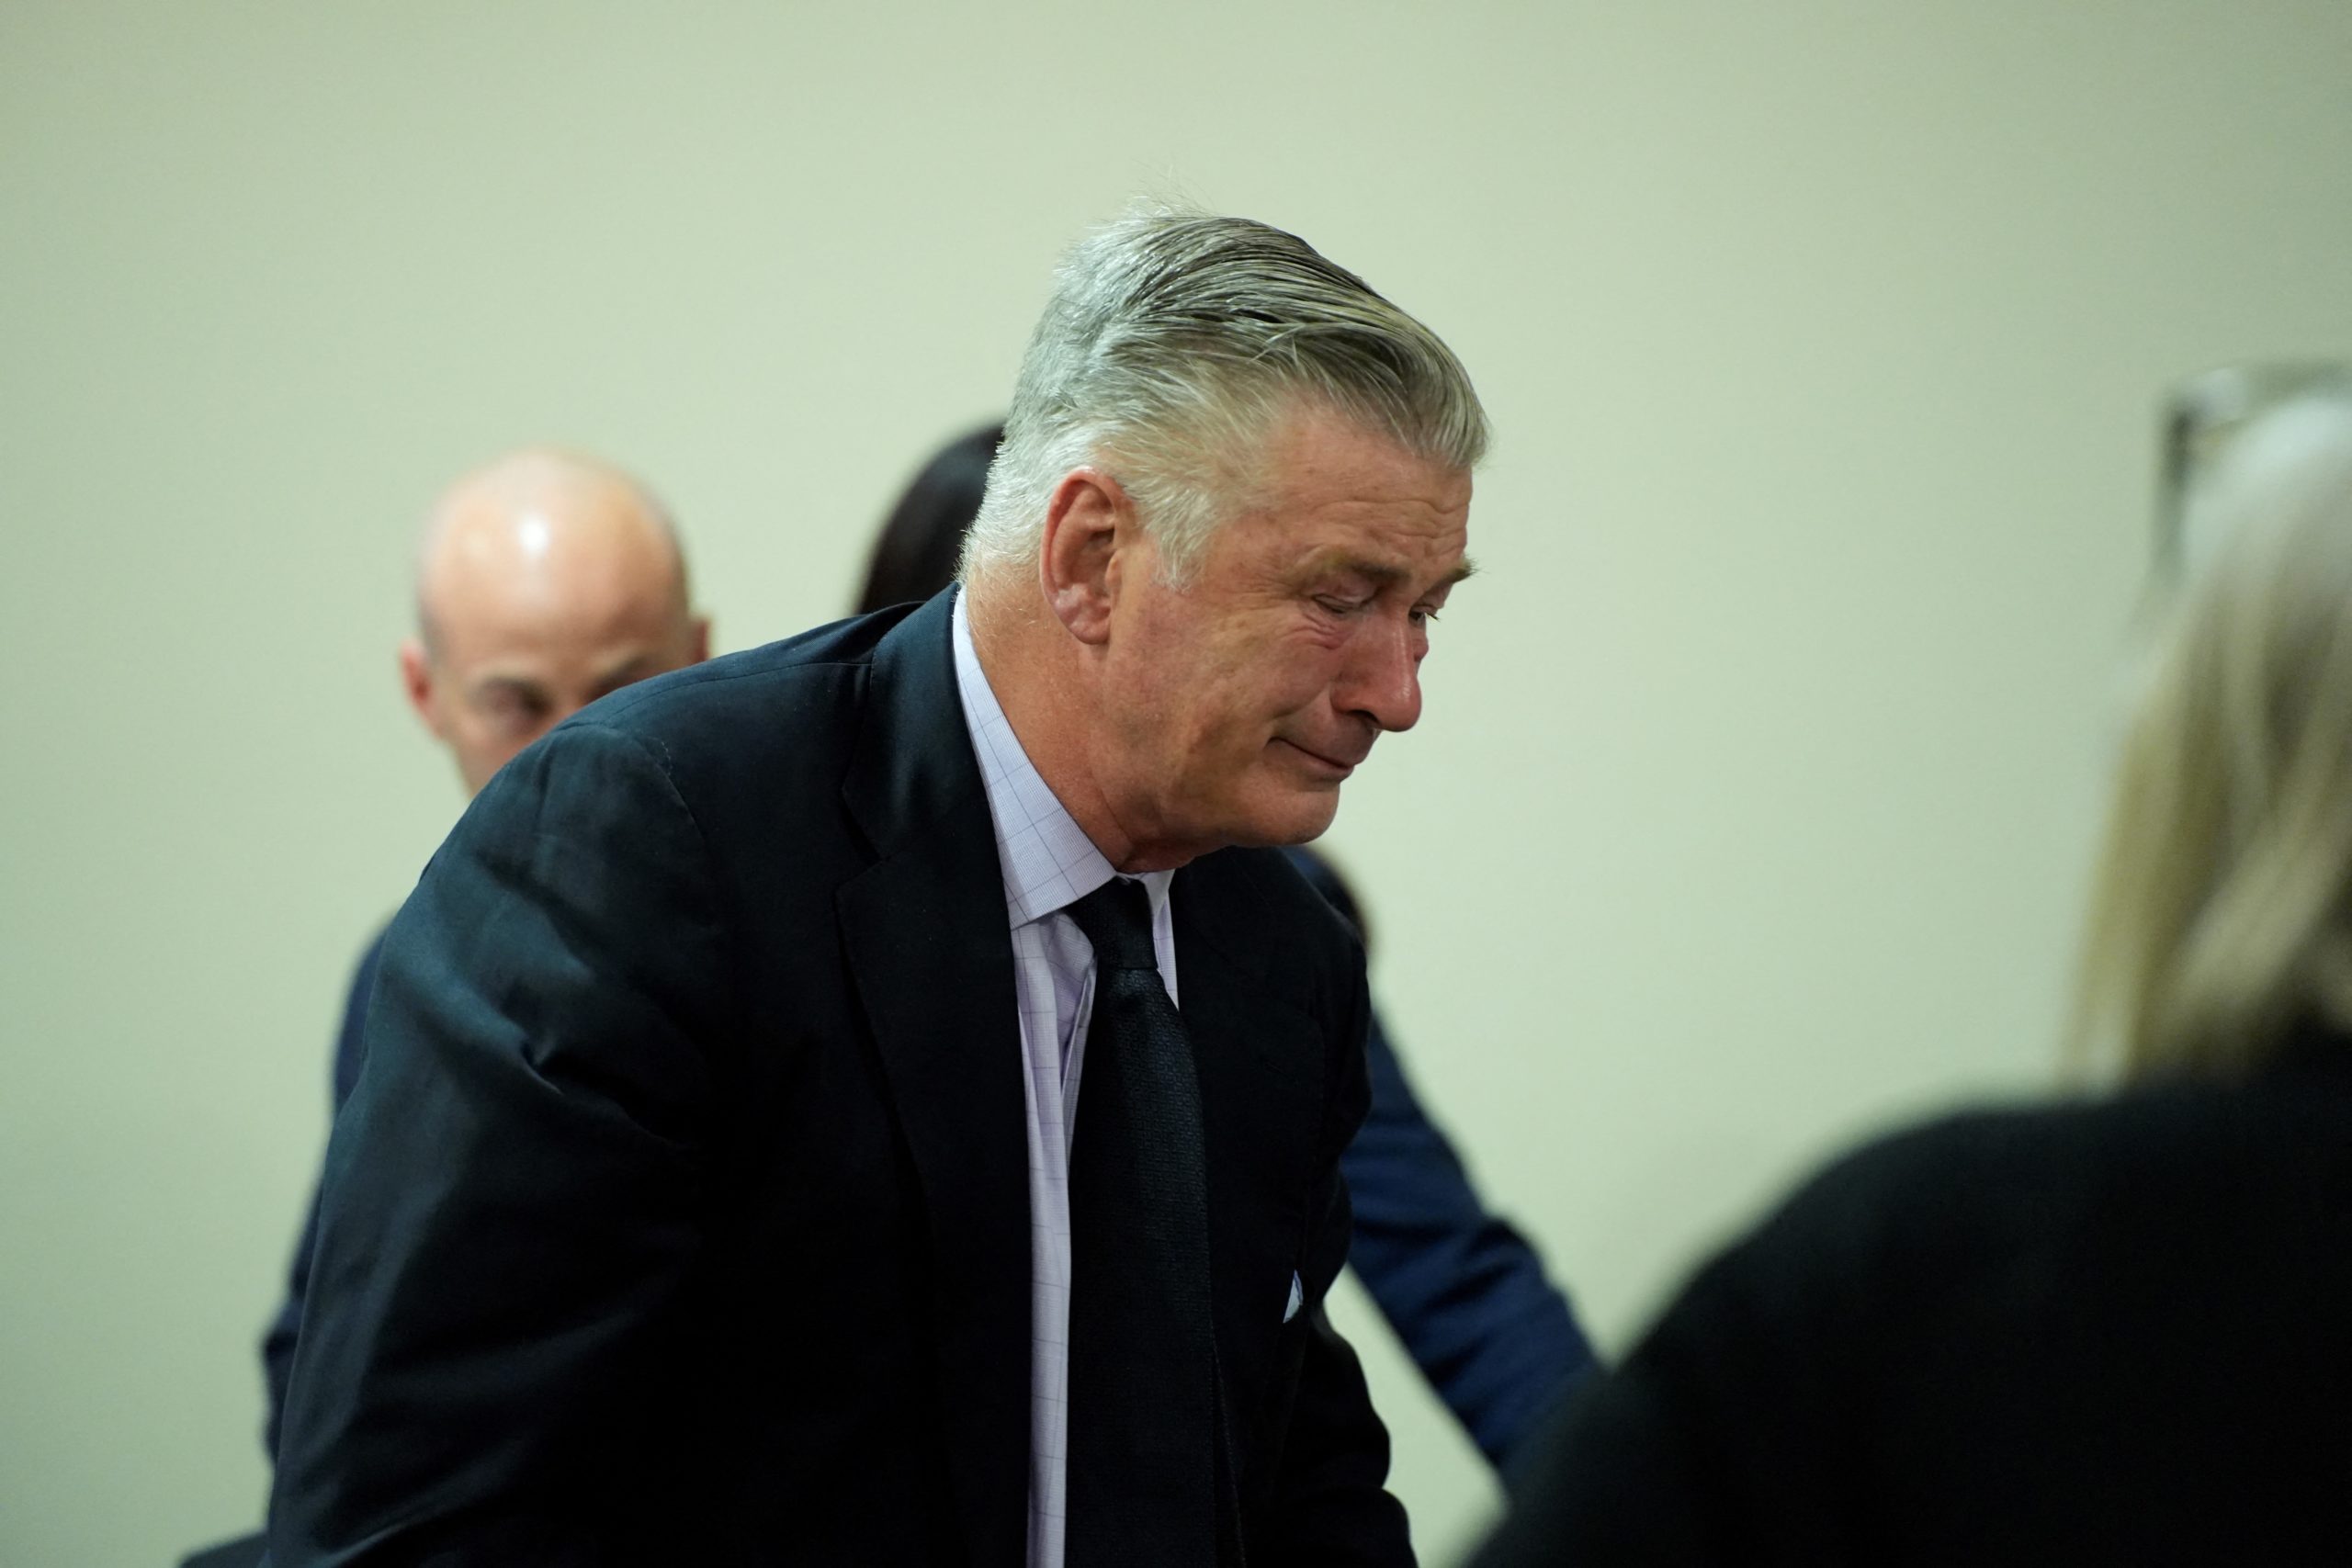 TOPSHOT - Actor Alec Baldwin reacts during his trial on involuntary manslaughter at Santa Fe County District Court in Santa Fe, New Mexico, on July 12, 2024. In October 2021, on the New Mexico set of the Western movie "Rust," a gun pointed by Baldwin discharged a live round, killing the film's cinematographer Halyna Hutchins and wounding its director. (Photo by RAMSAY DE GIVE / POOL / AFP) (Photo by RAMSAY DE GIVE/POOL/AFP via Getty Images)